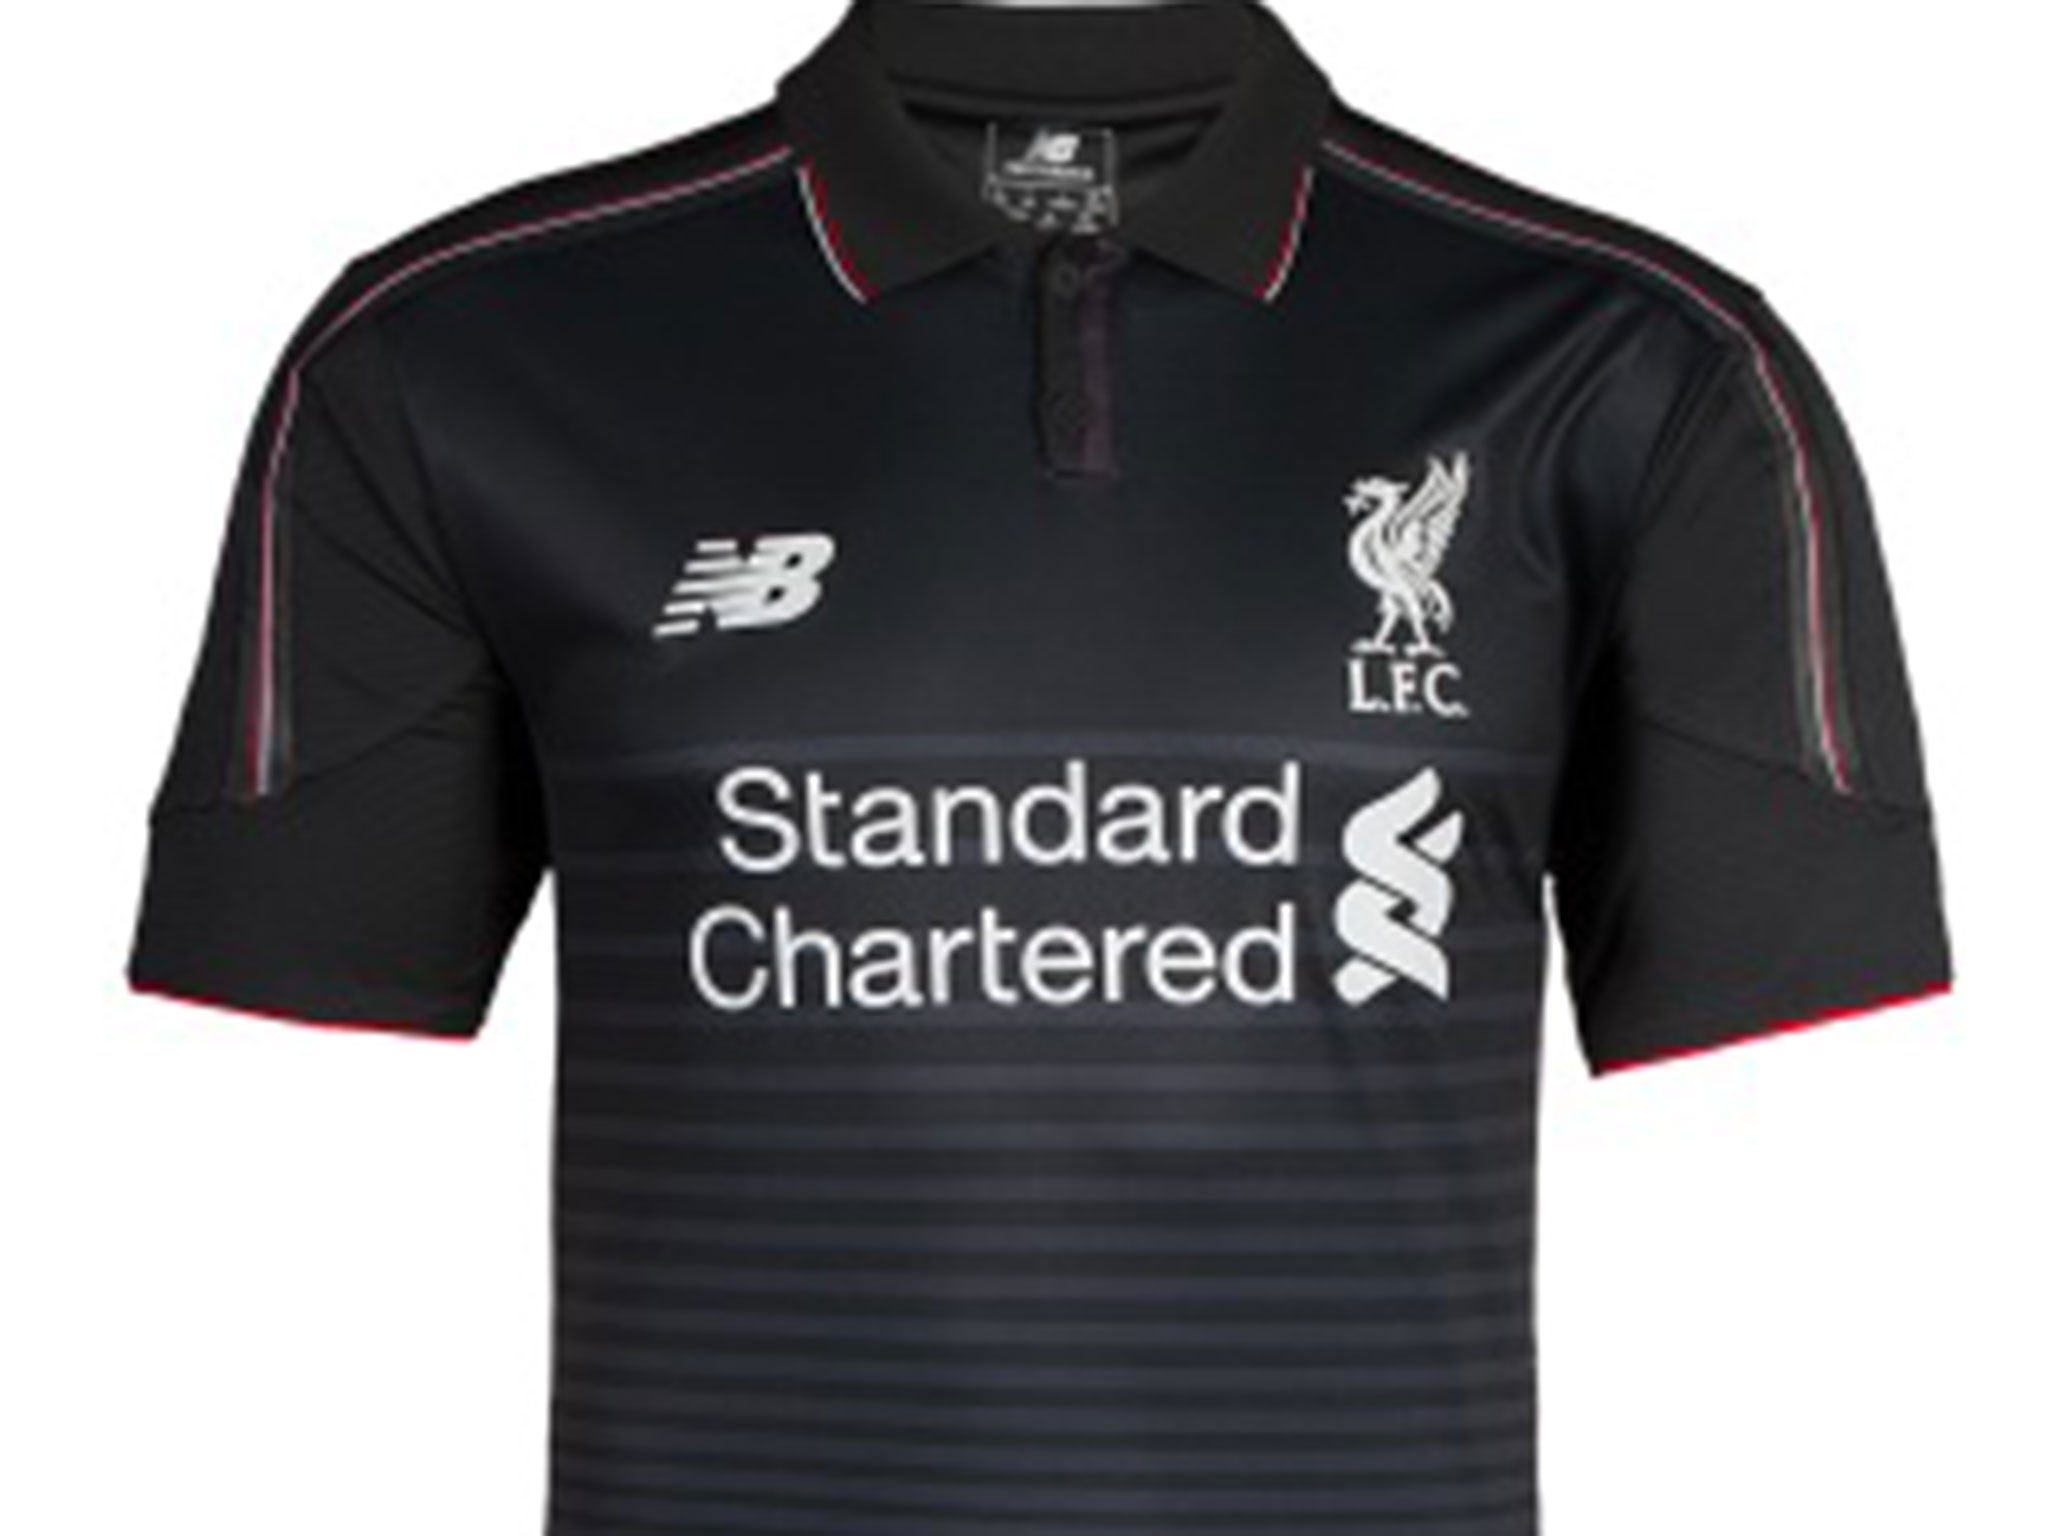 Liverpool third shirt All kit revealed which Roberto Firmino and James Milner will wear next season | The Independent | The Independent